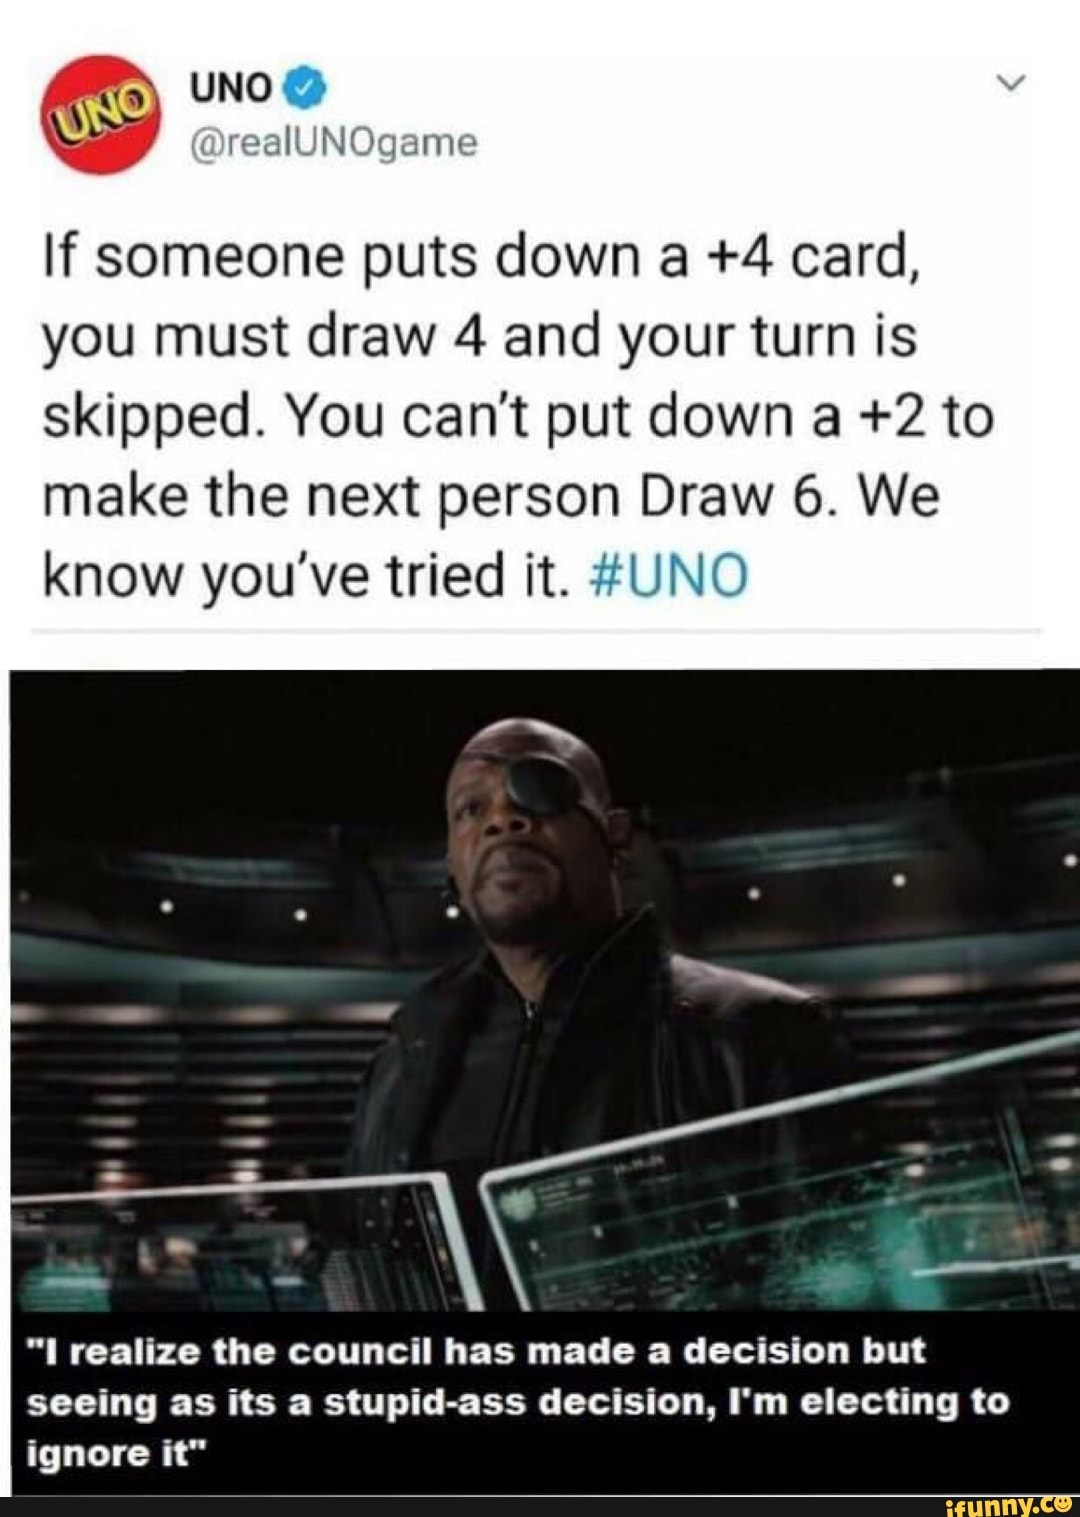 UNO - If someone puts down a +4 card, you must draw 4 and your turn is  skipped. You can't put down a +2 to make the next person Draw 6. We